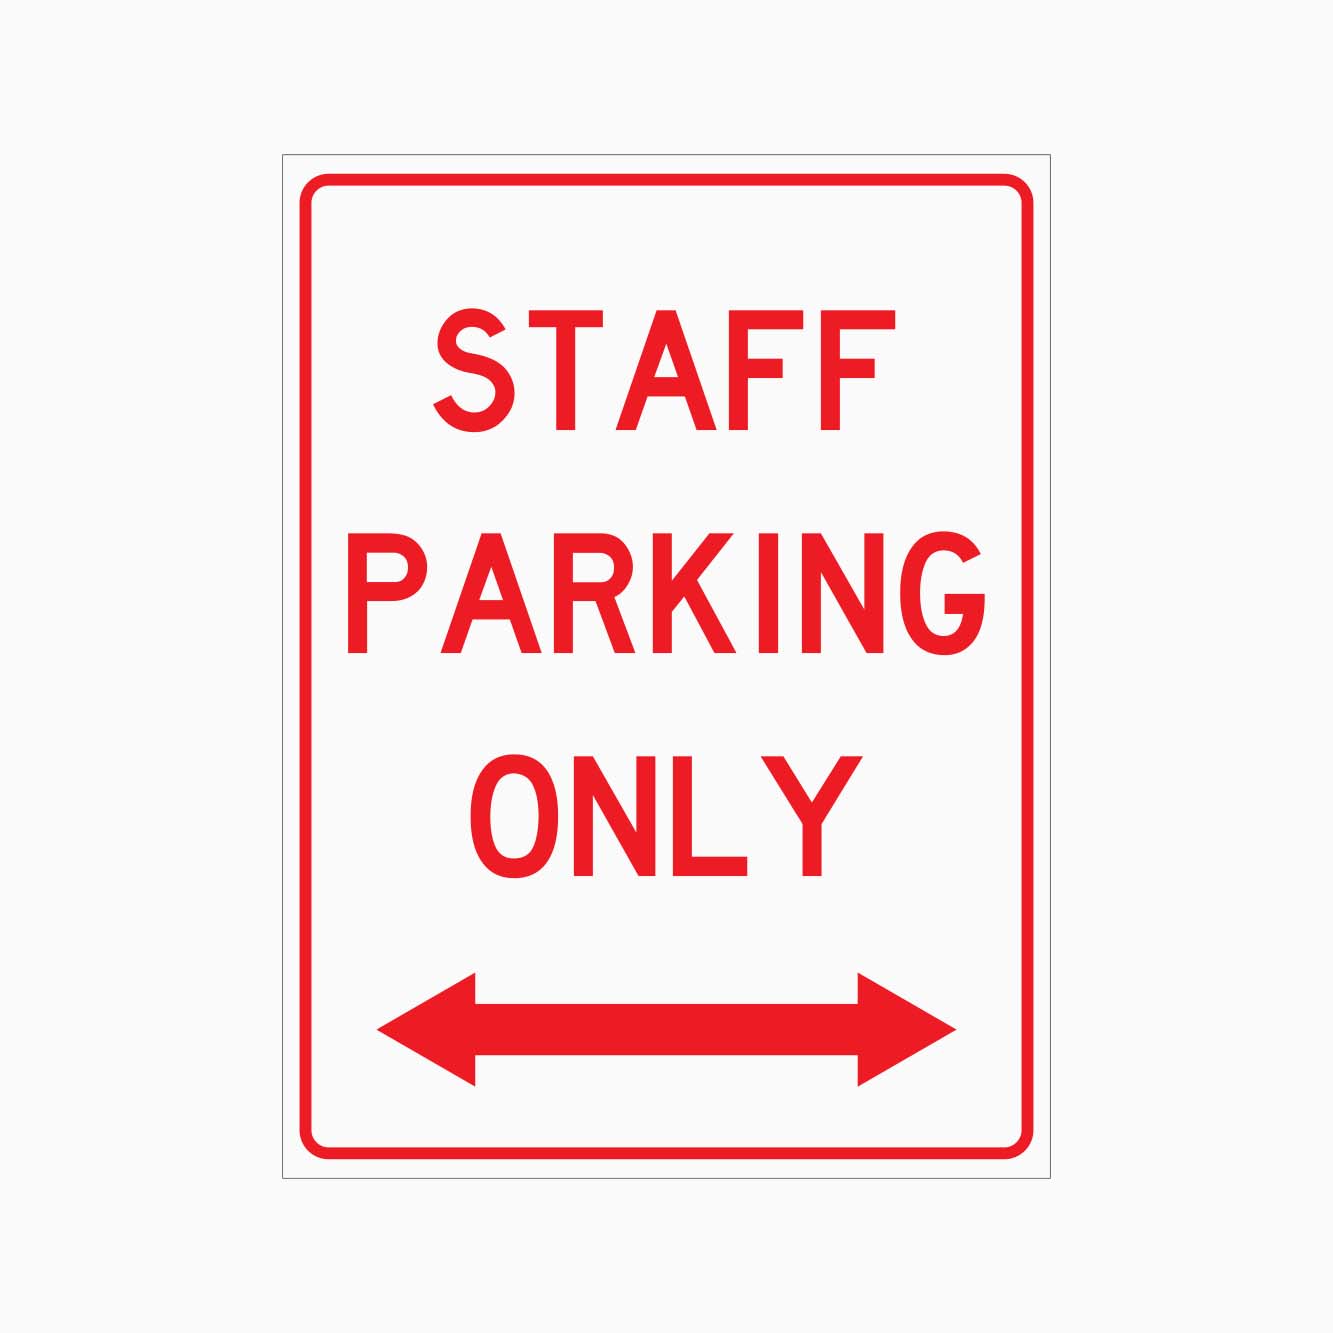 STAFF PARKING ONLY SIGN - GET SIGNS